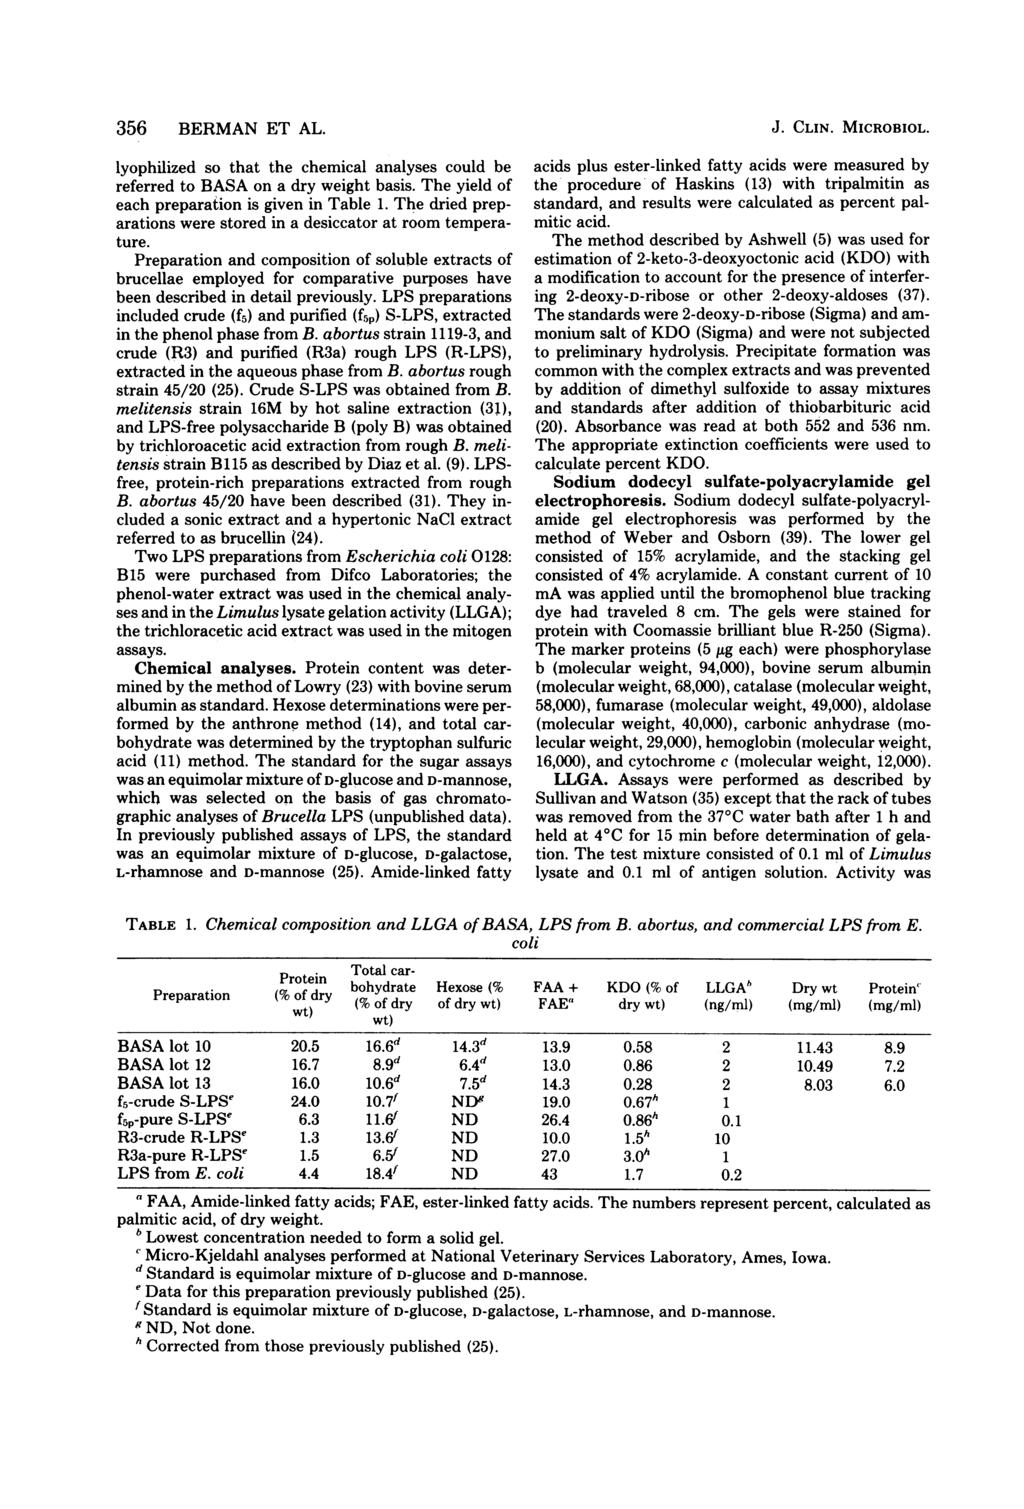 356 BERMAN ET AL. lyophilized so that the chemical analyses could be referred to BASA on a dry weight basis. The yield of each preparation is given in Table 1.